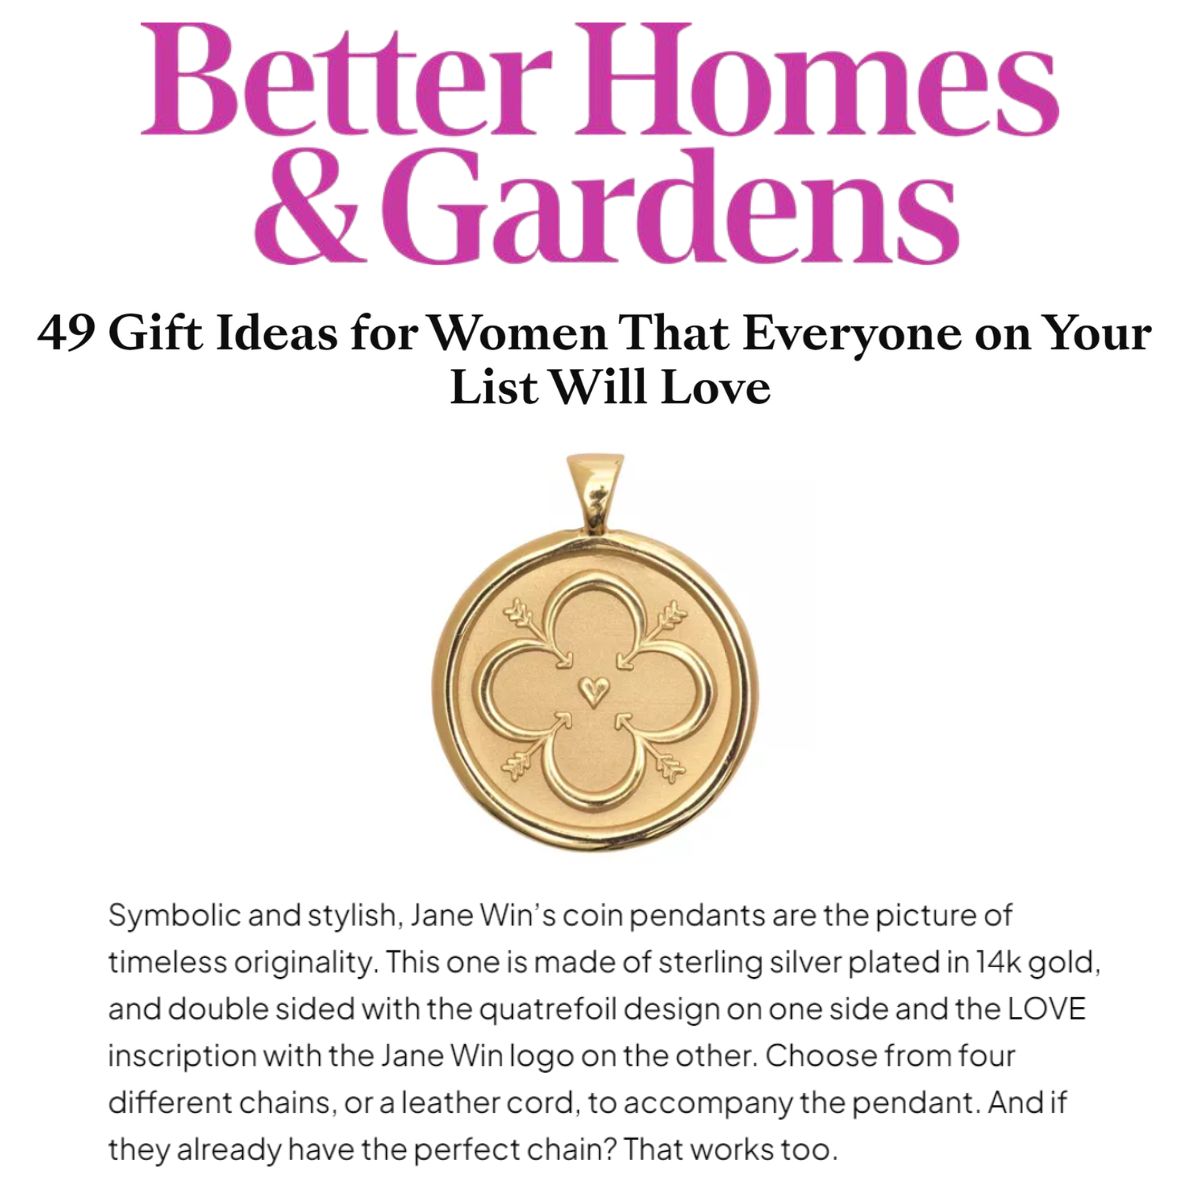 Press Highlight: Better Homes & Gardens "49 Gift Ideas That Everyone on Your List Will Love"